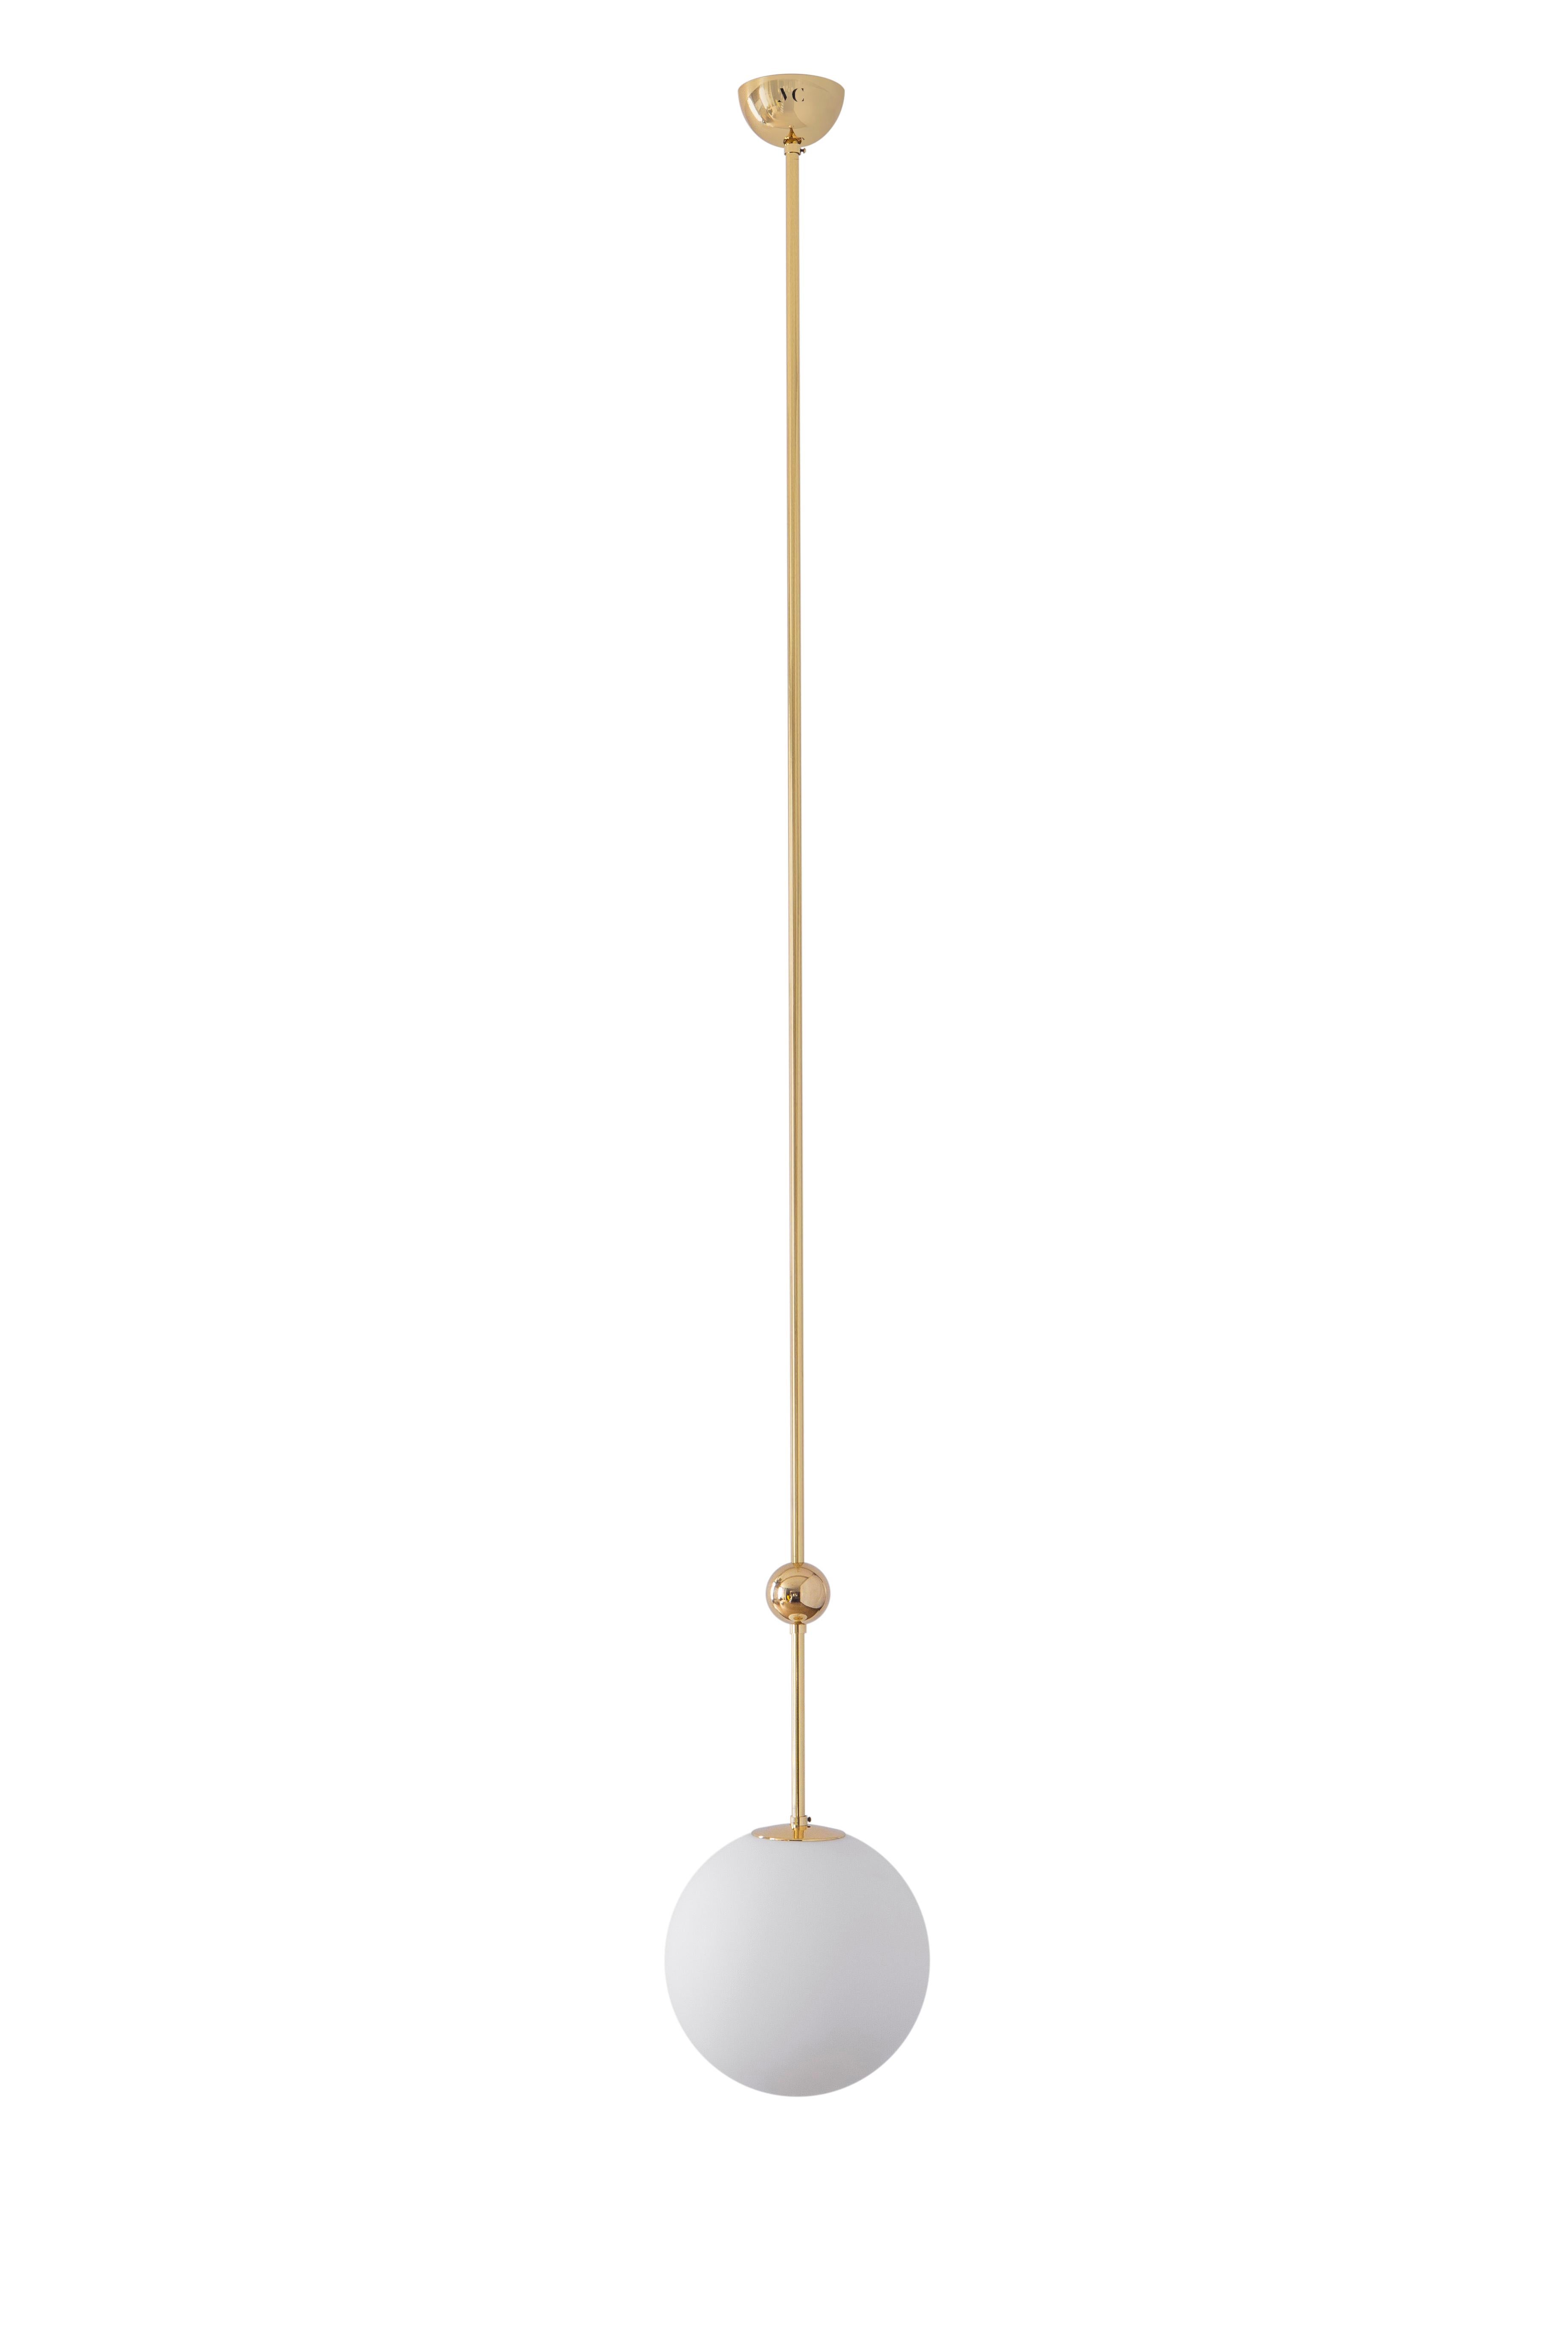 Pendant 02 black by Magic Circus Editions.
Dimensions: D 25 x W 25 x H 150 cm, also available in H 110, 130, 150, 175, 190 cm.
Materials: Brass, mouth blown glass.

All our lamps can be wired according to each country. If sold to the USA it will